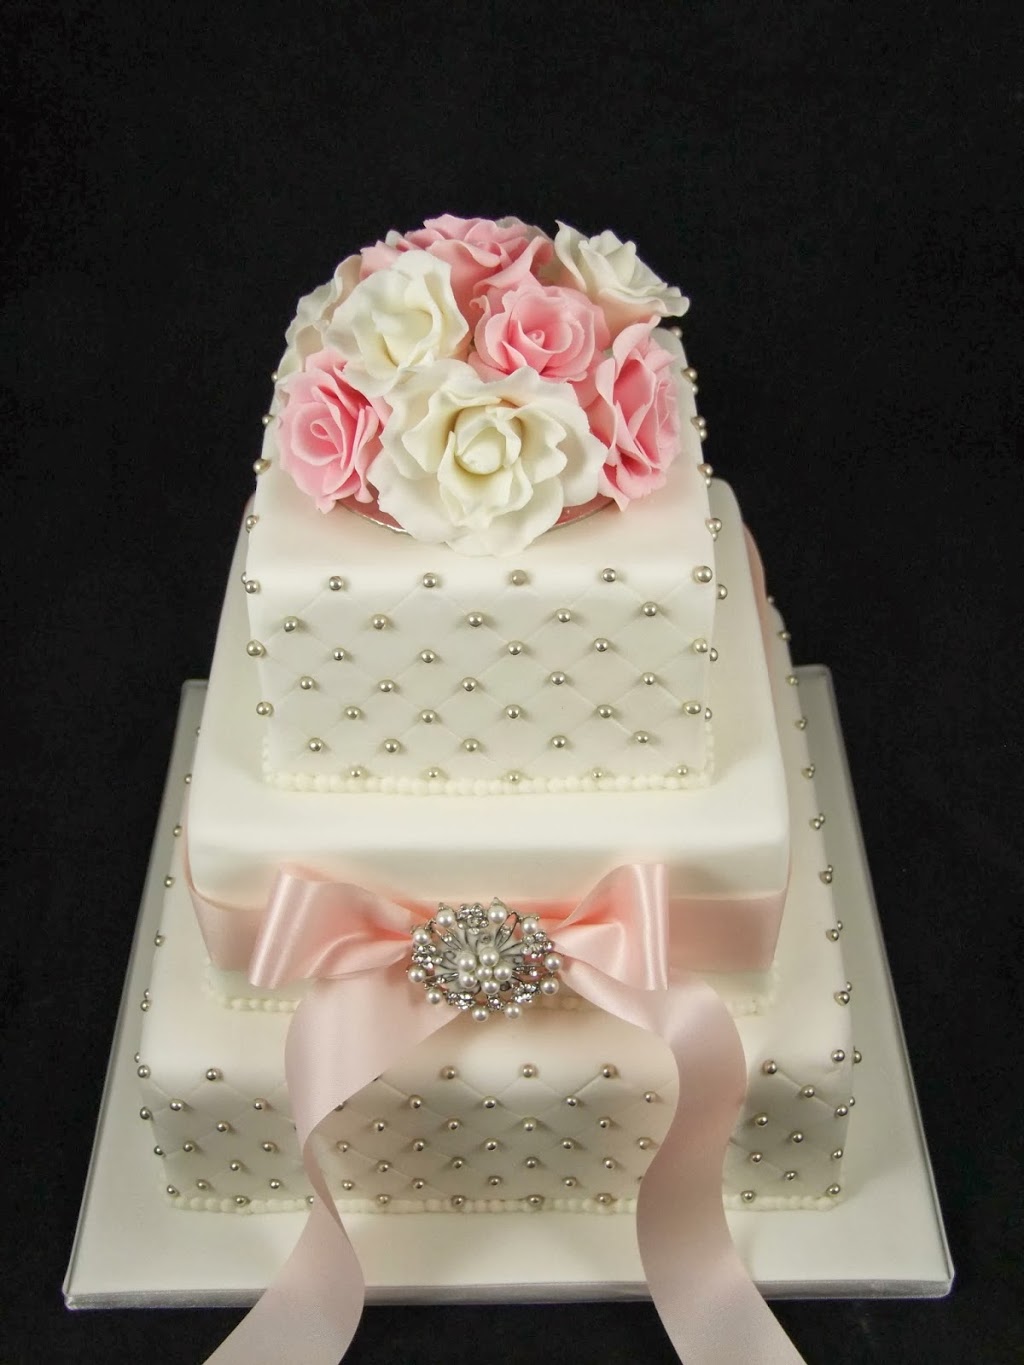 Rachaels Cakes | bakery | 66 Marion St, Thirlmere NSW 2572, Australia | 0401228236 OR +61 401 228 236